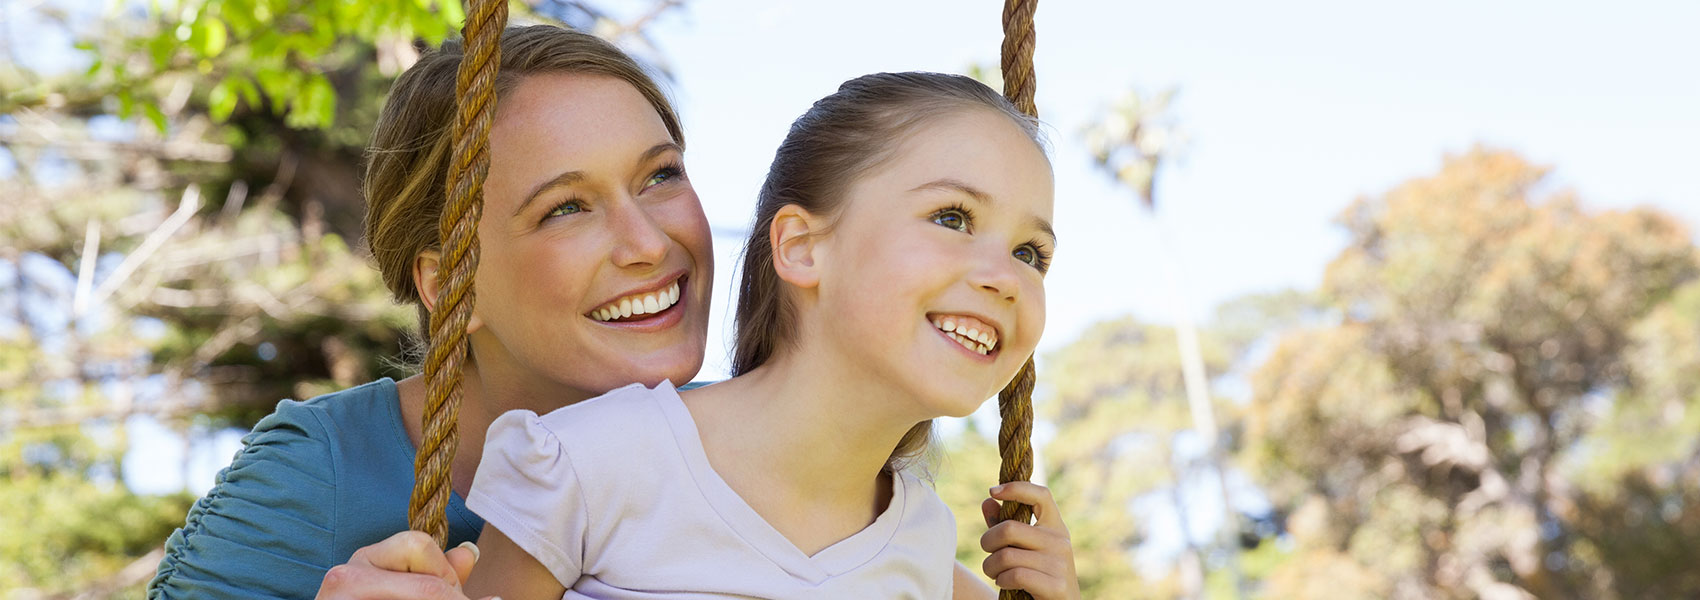 Fabulous Smiles Orthodontics Mother Daughter Outdoors Smiling